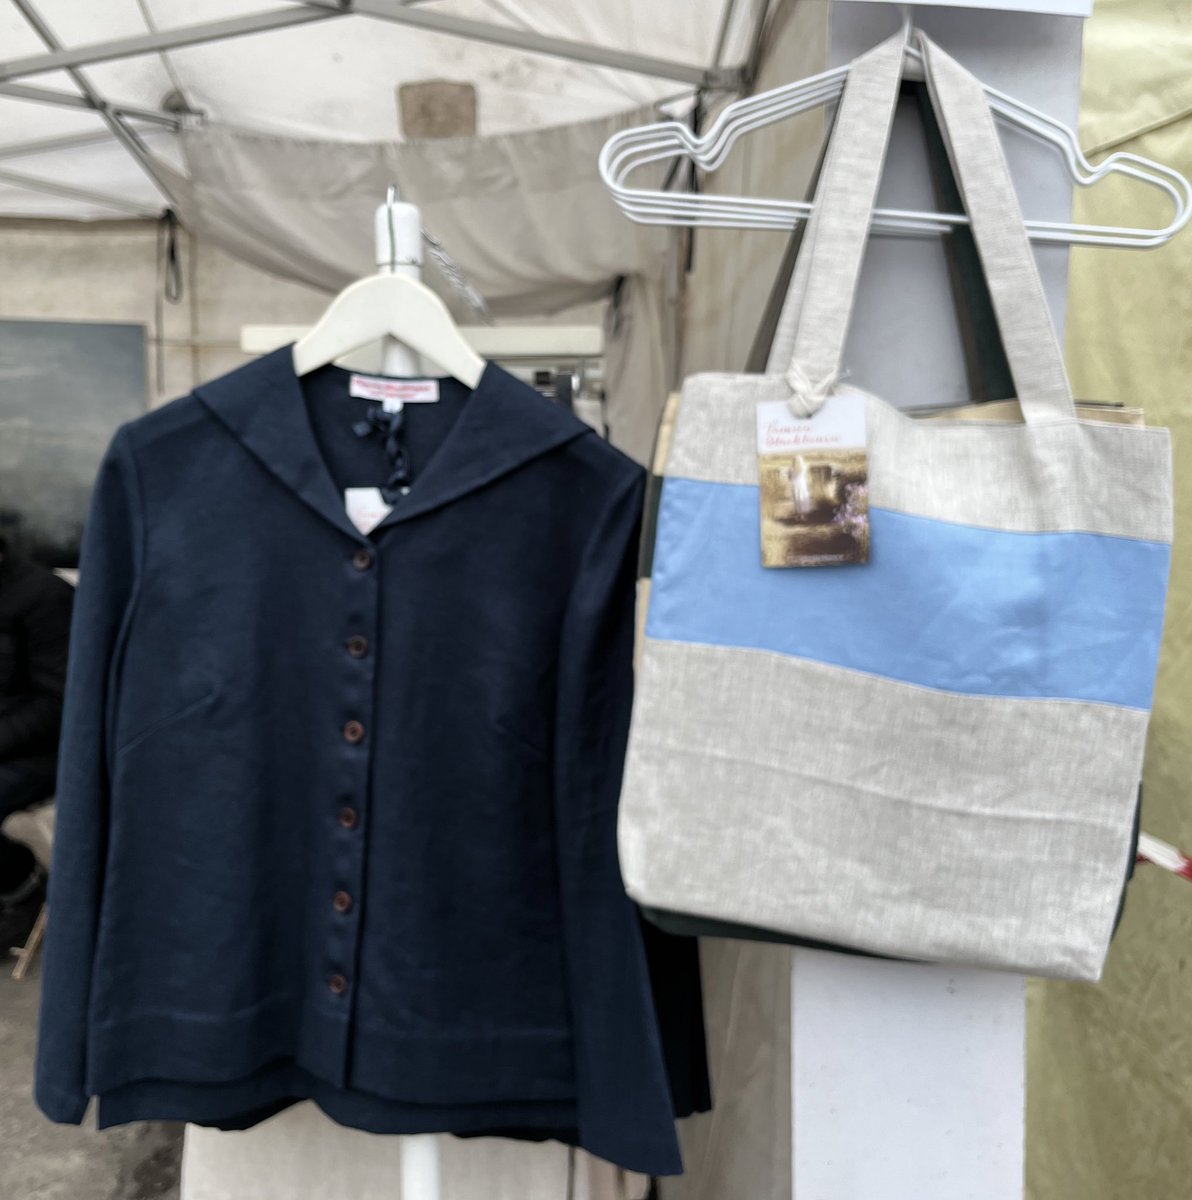 Blue on blue. Kinsale (Over)Shirt in navy Irish linen beside a Zero Waste Library Bag, made of the odd shapes of Irish linen left over from making up garments.  Nothing is wasted. ✂️🧵🪡♻️
💚 using what already exists
💚 minimising waste
💚 each one of a kind
#zerowastegoals